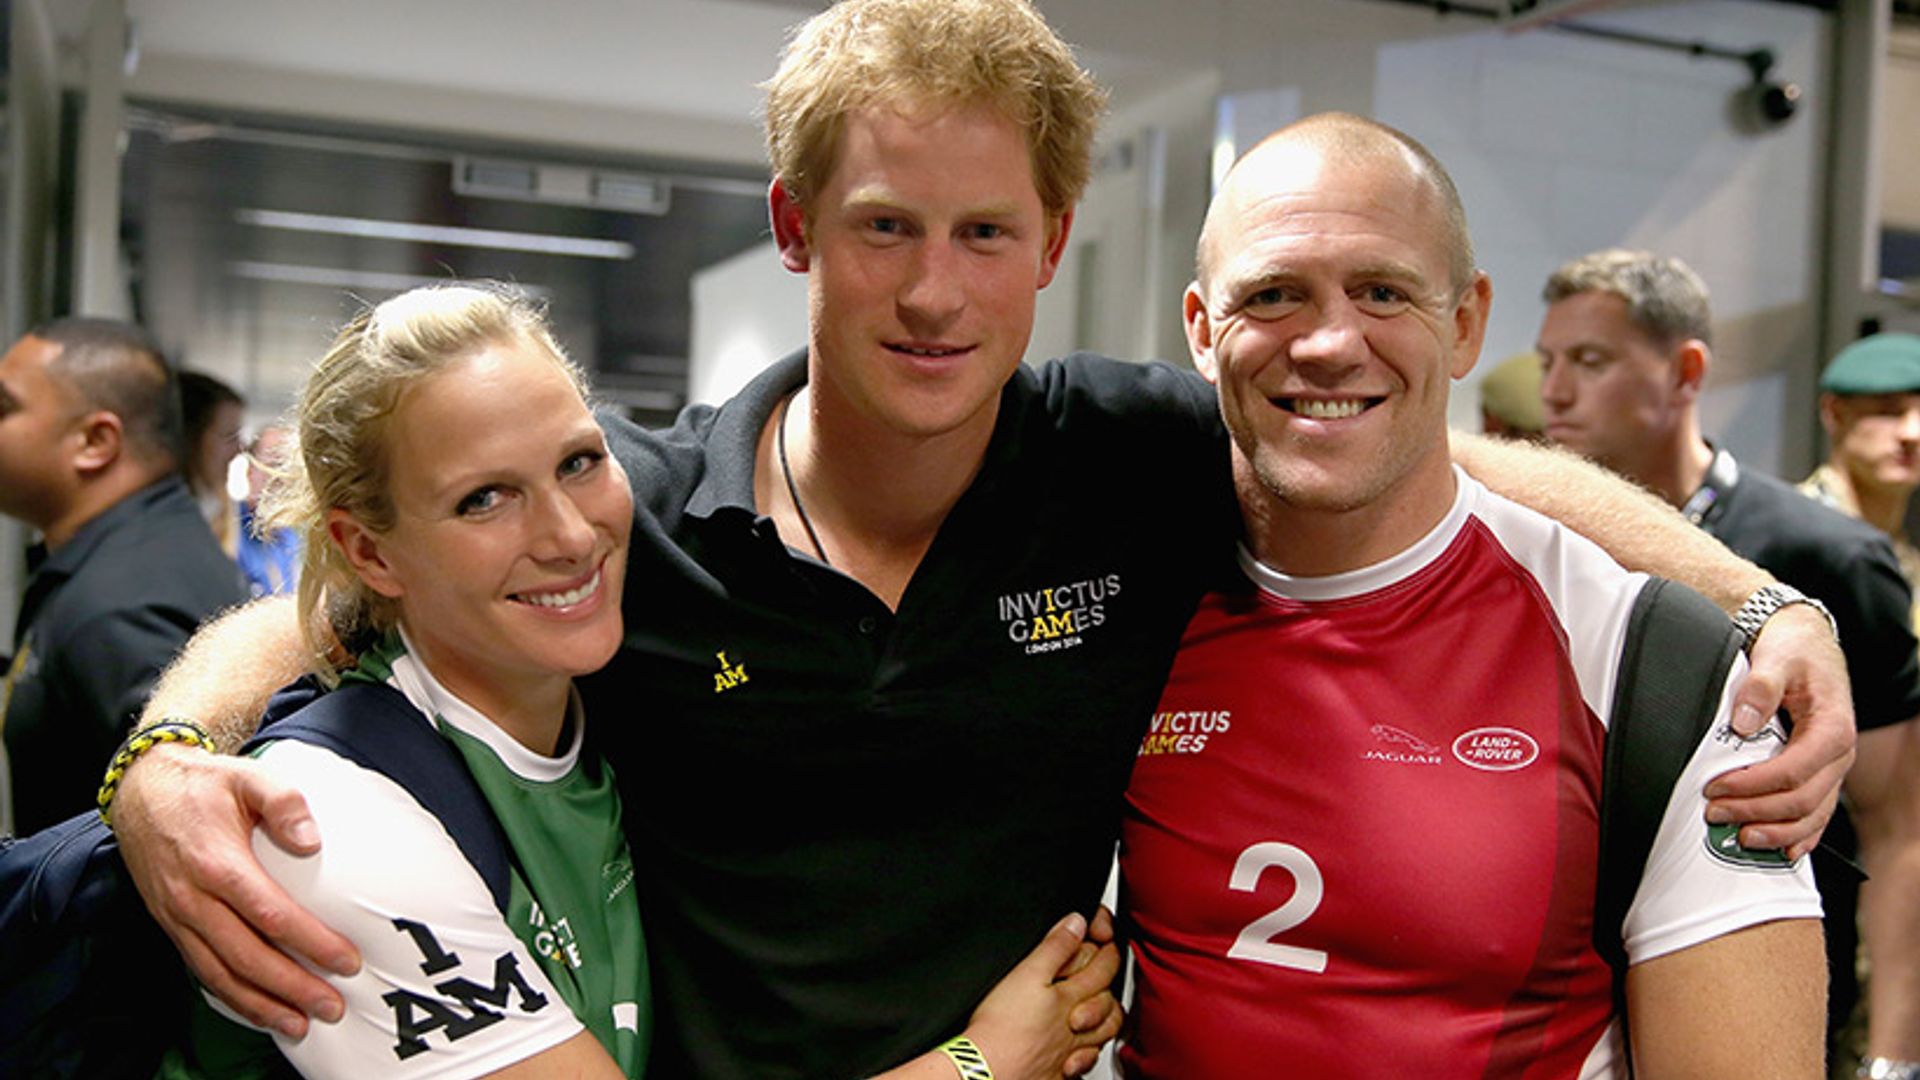 Mike Tindall's wedding day advice to Prince Harry and Meghan Markle